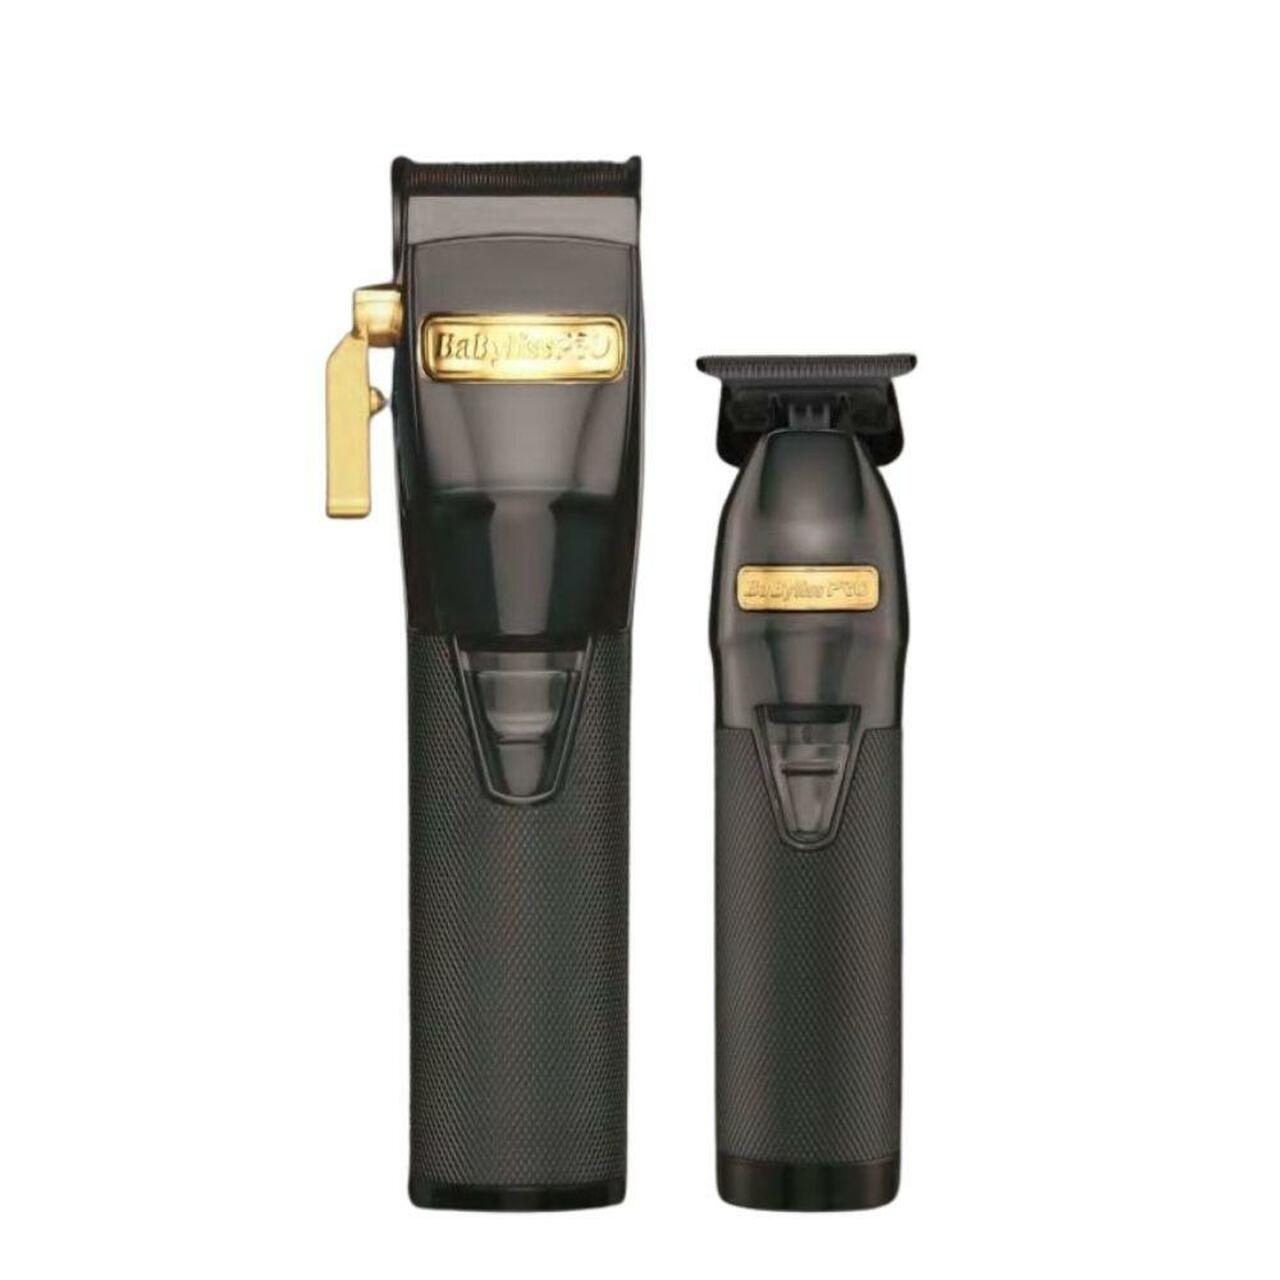 BaBylissPRO LimitedFX Collection Gold Black Clipper & Trimmer Duo  FXHOLPK2GB - Ideal Barber Supply